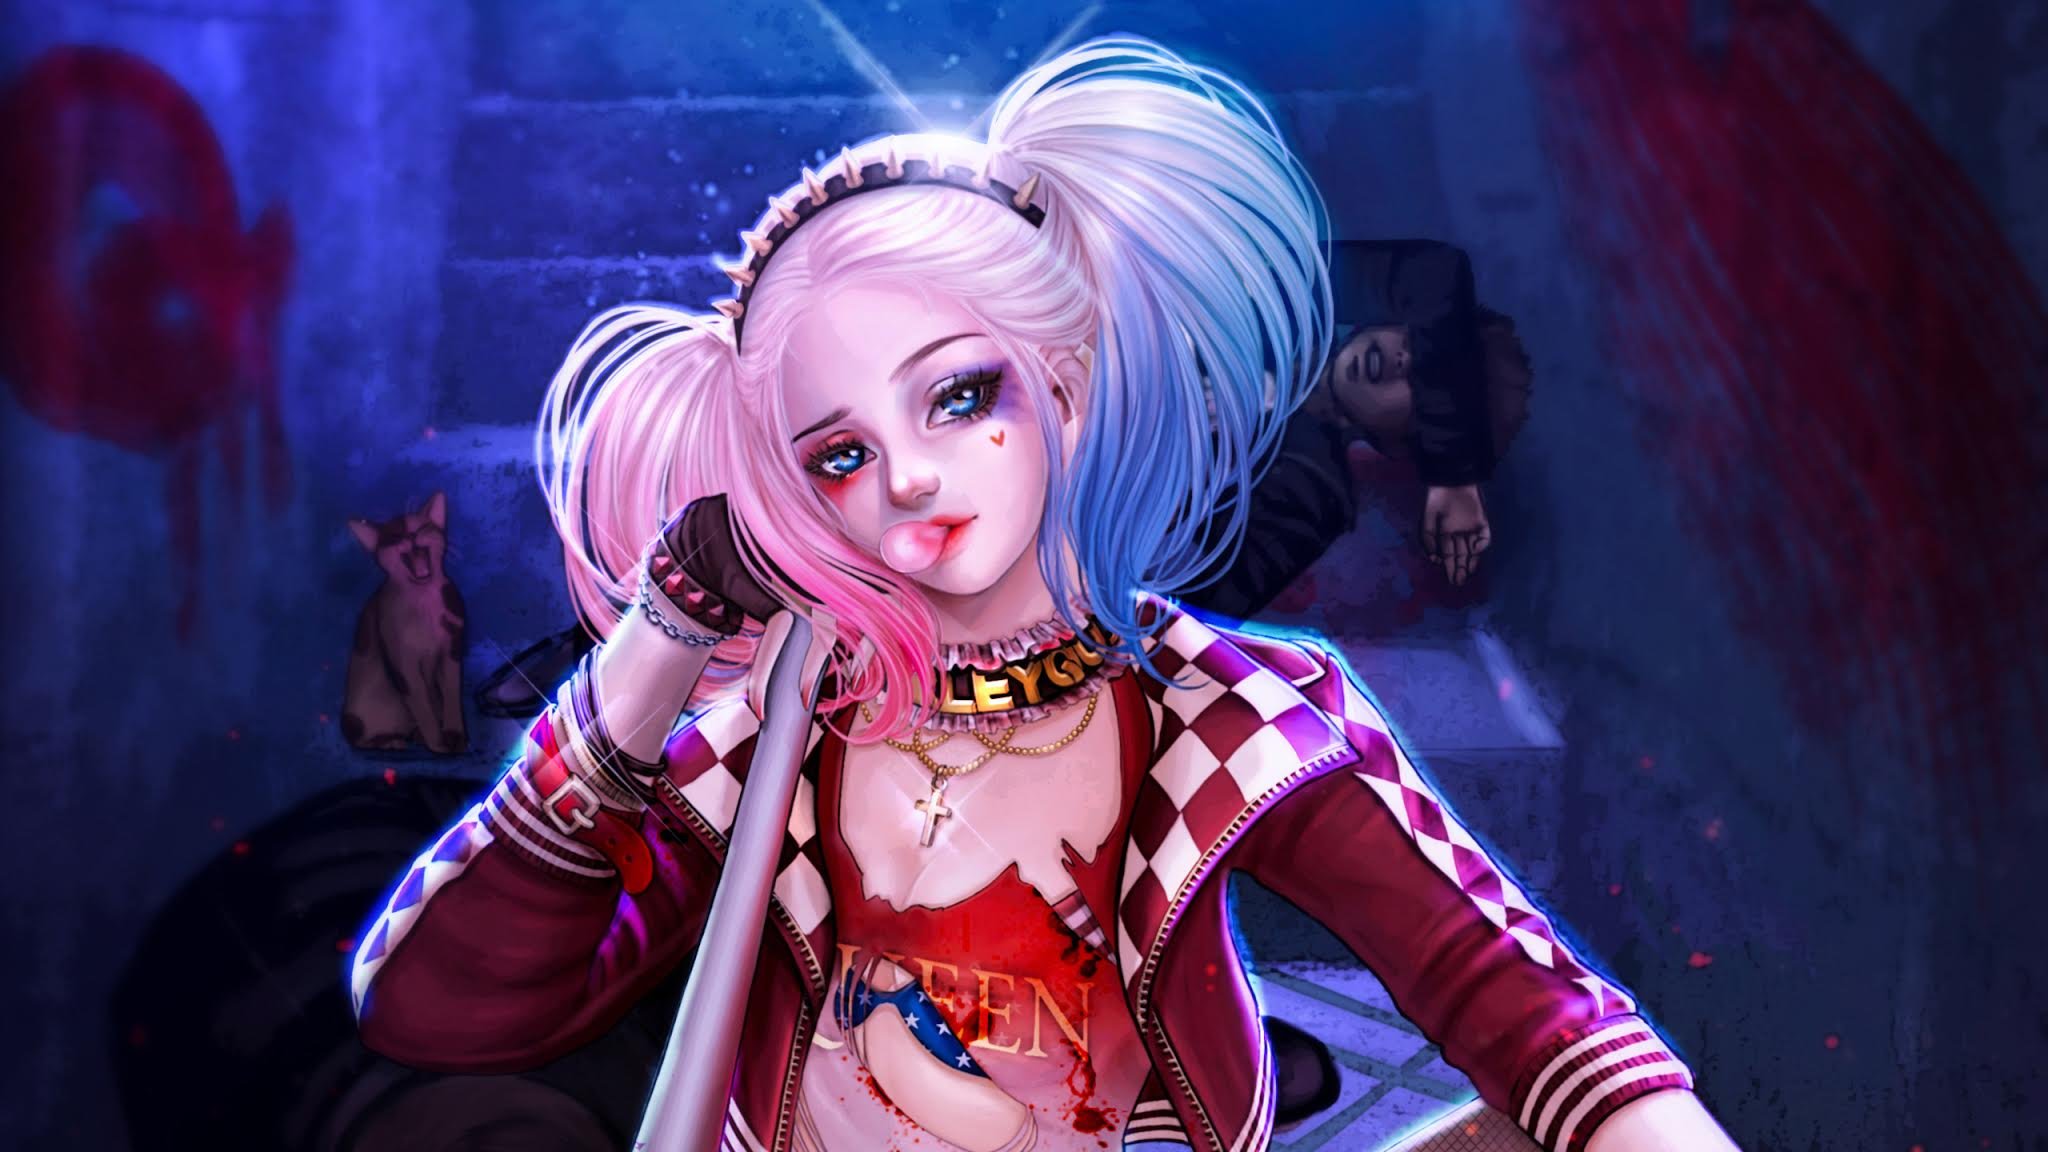 Anime Harley Quinn Widescreen Wallpapers 